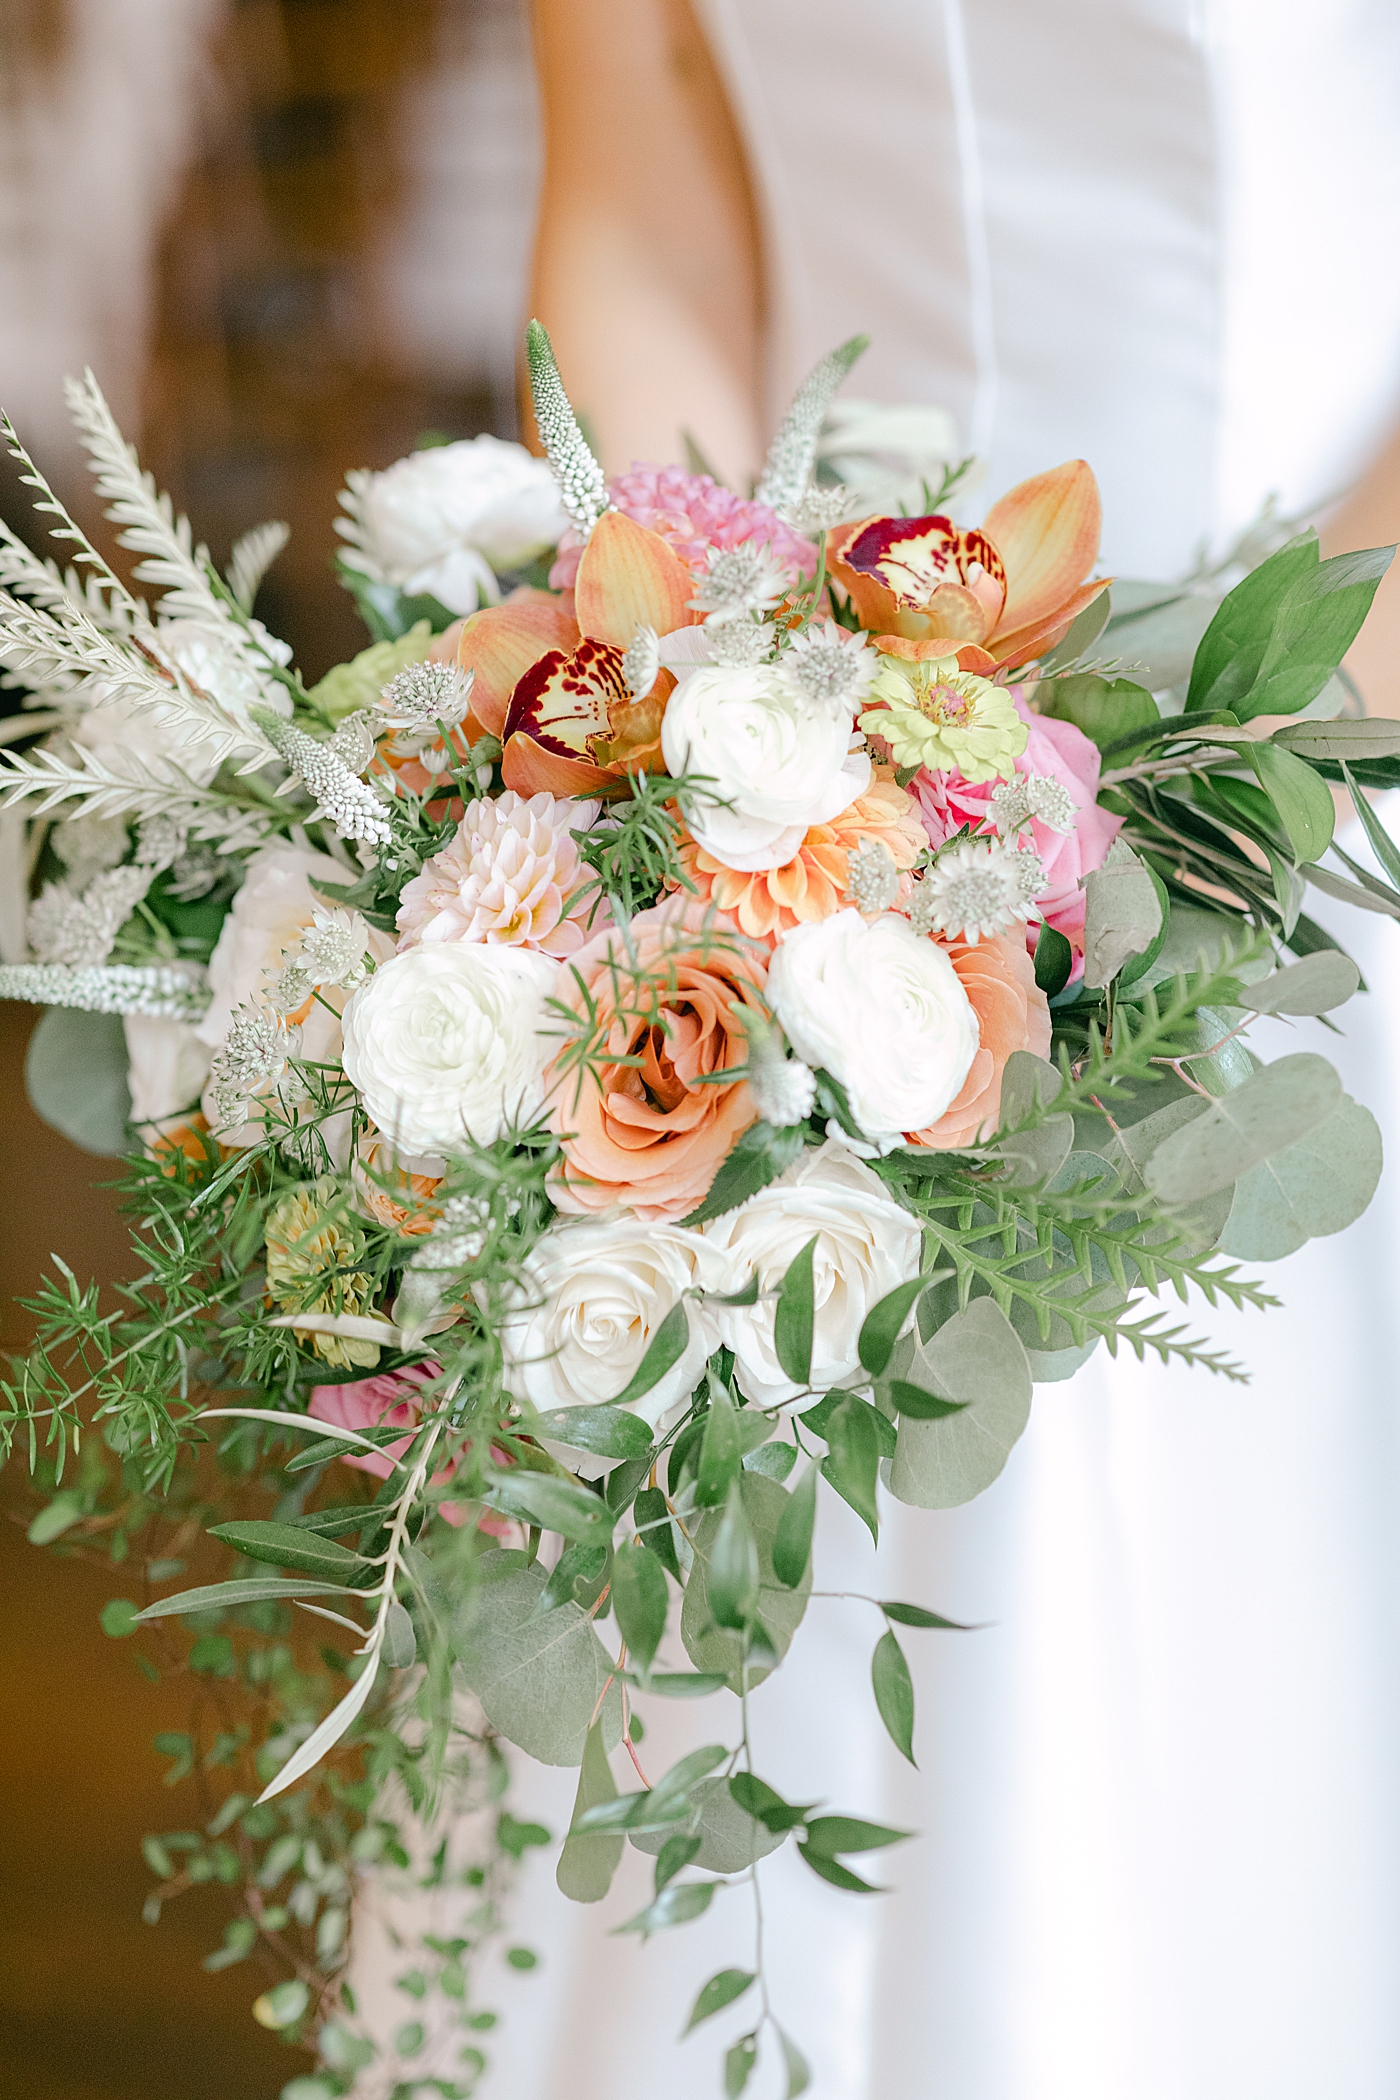 Colorful bridal bouquet with orchids and greenery | Excelsior PA Wedding Photography by Hope Helmuth Photography